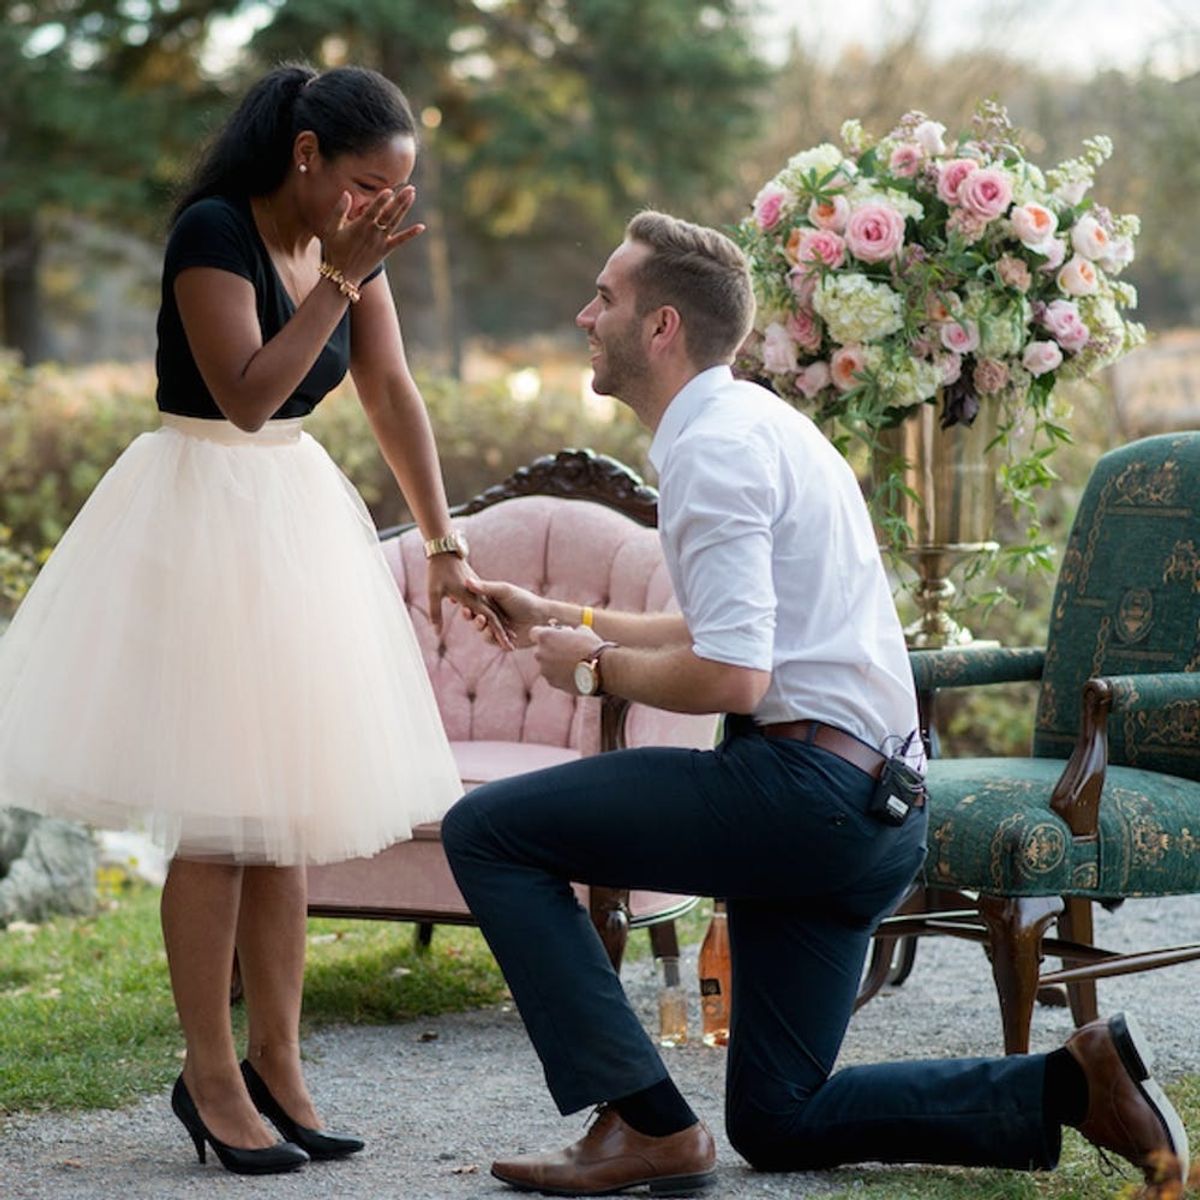 This Wedding Planner’s Picture-Perfect Park Proposal Will Give You *All* the Feels